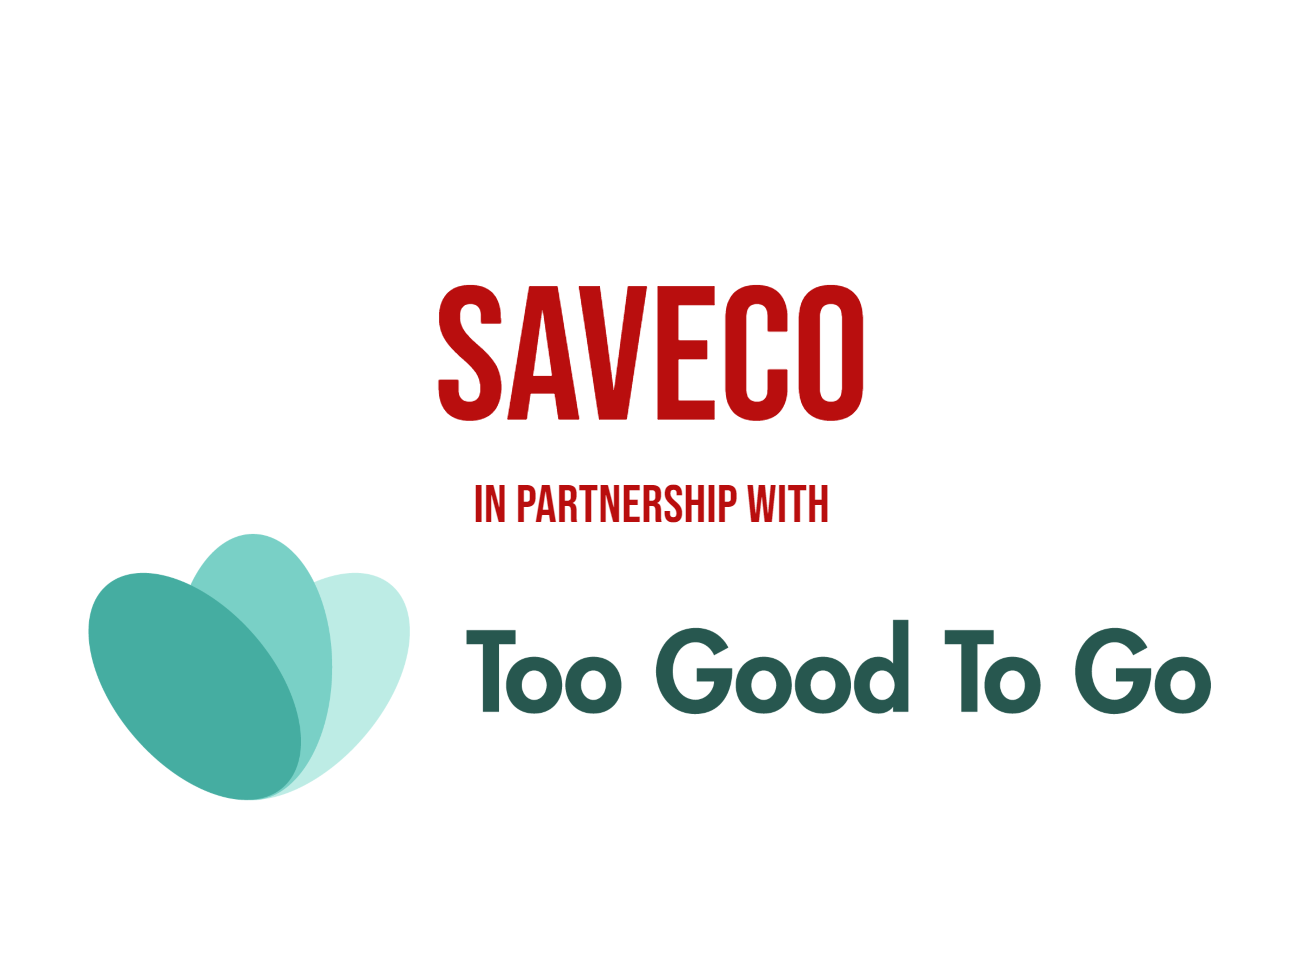 SaveCo in partnership with Too Good To Go